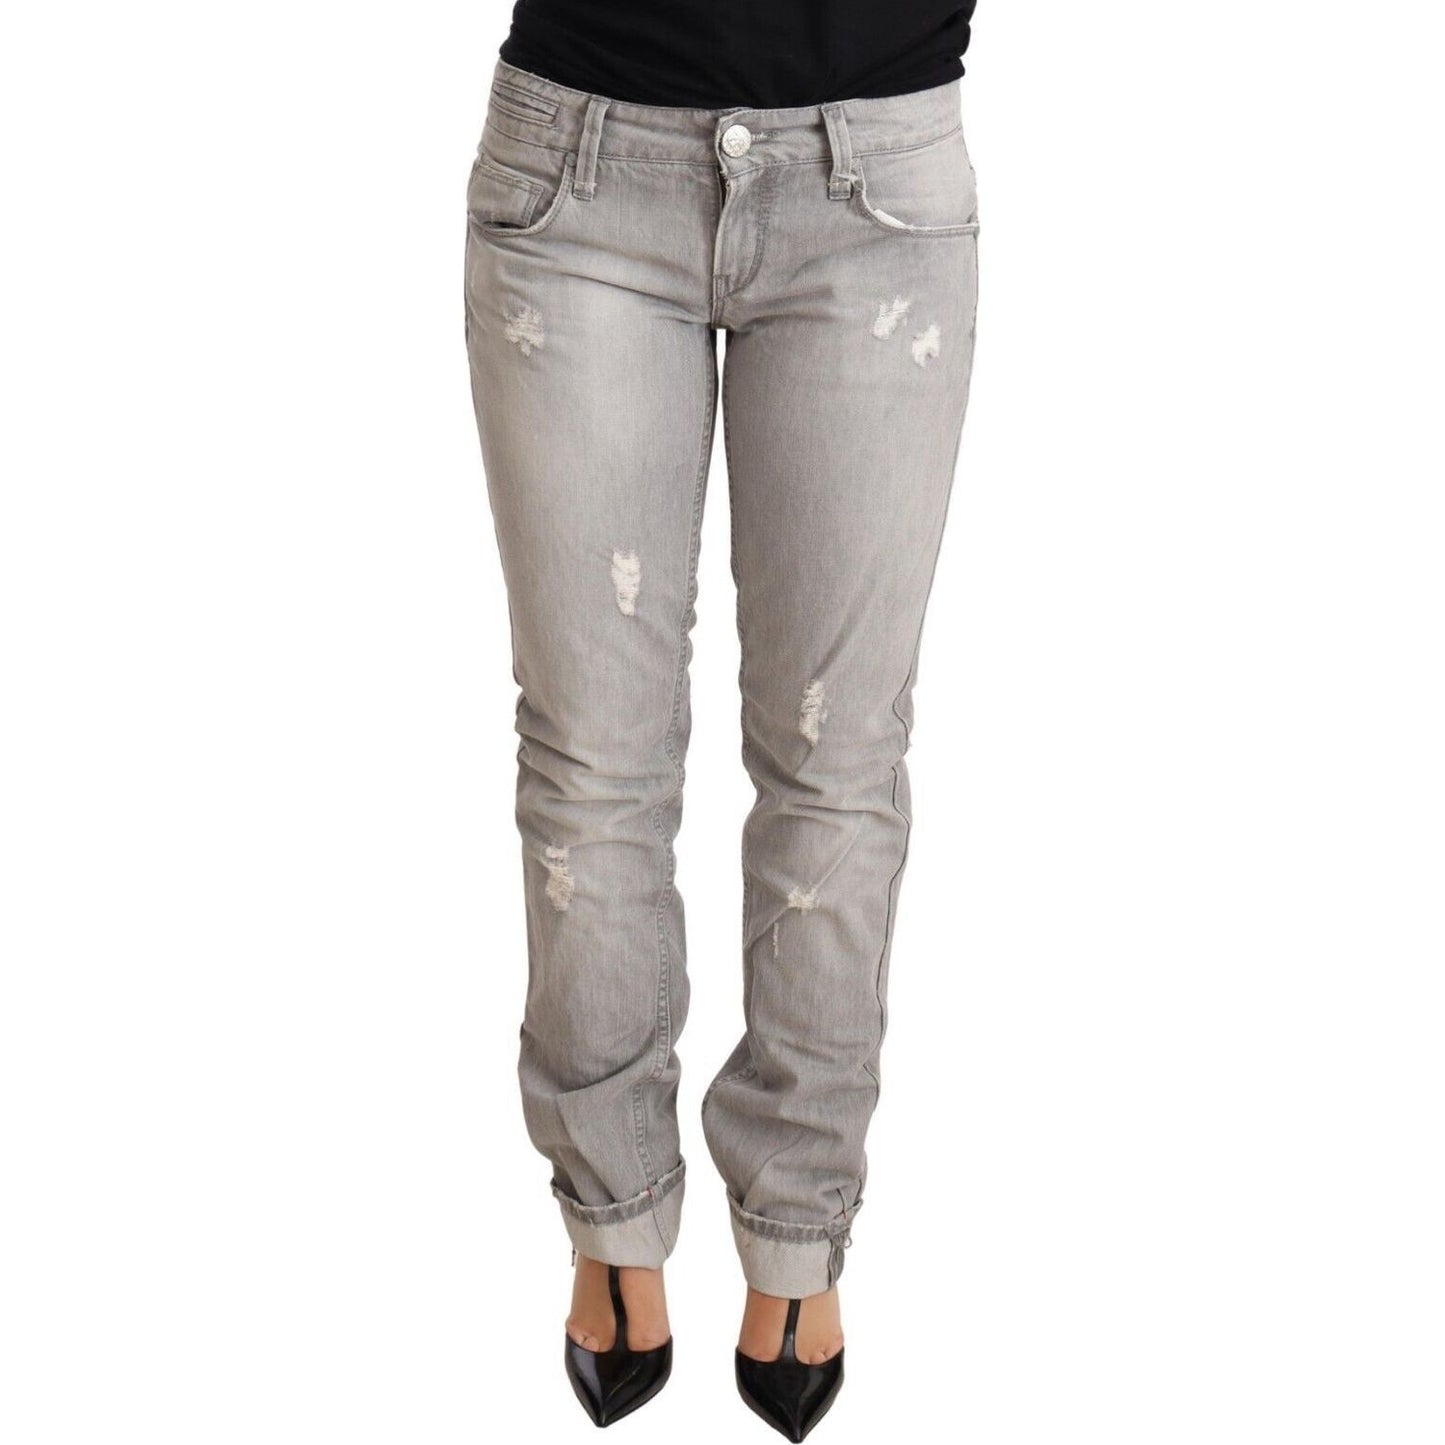 Acht Chic Slim Fit Tattered Gray Wash Jeans Jeans & Pants gray-tattered-cotton-slim-fit-folded-hem-women-denim-jeans